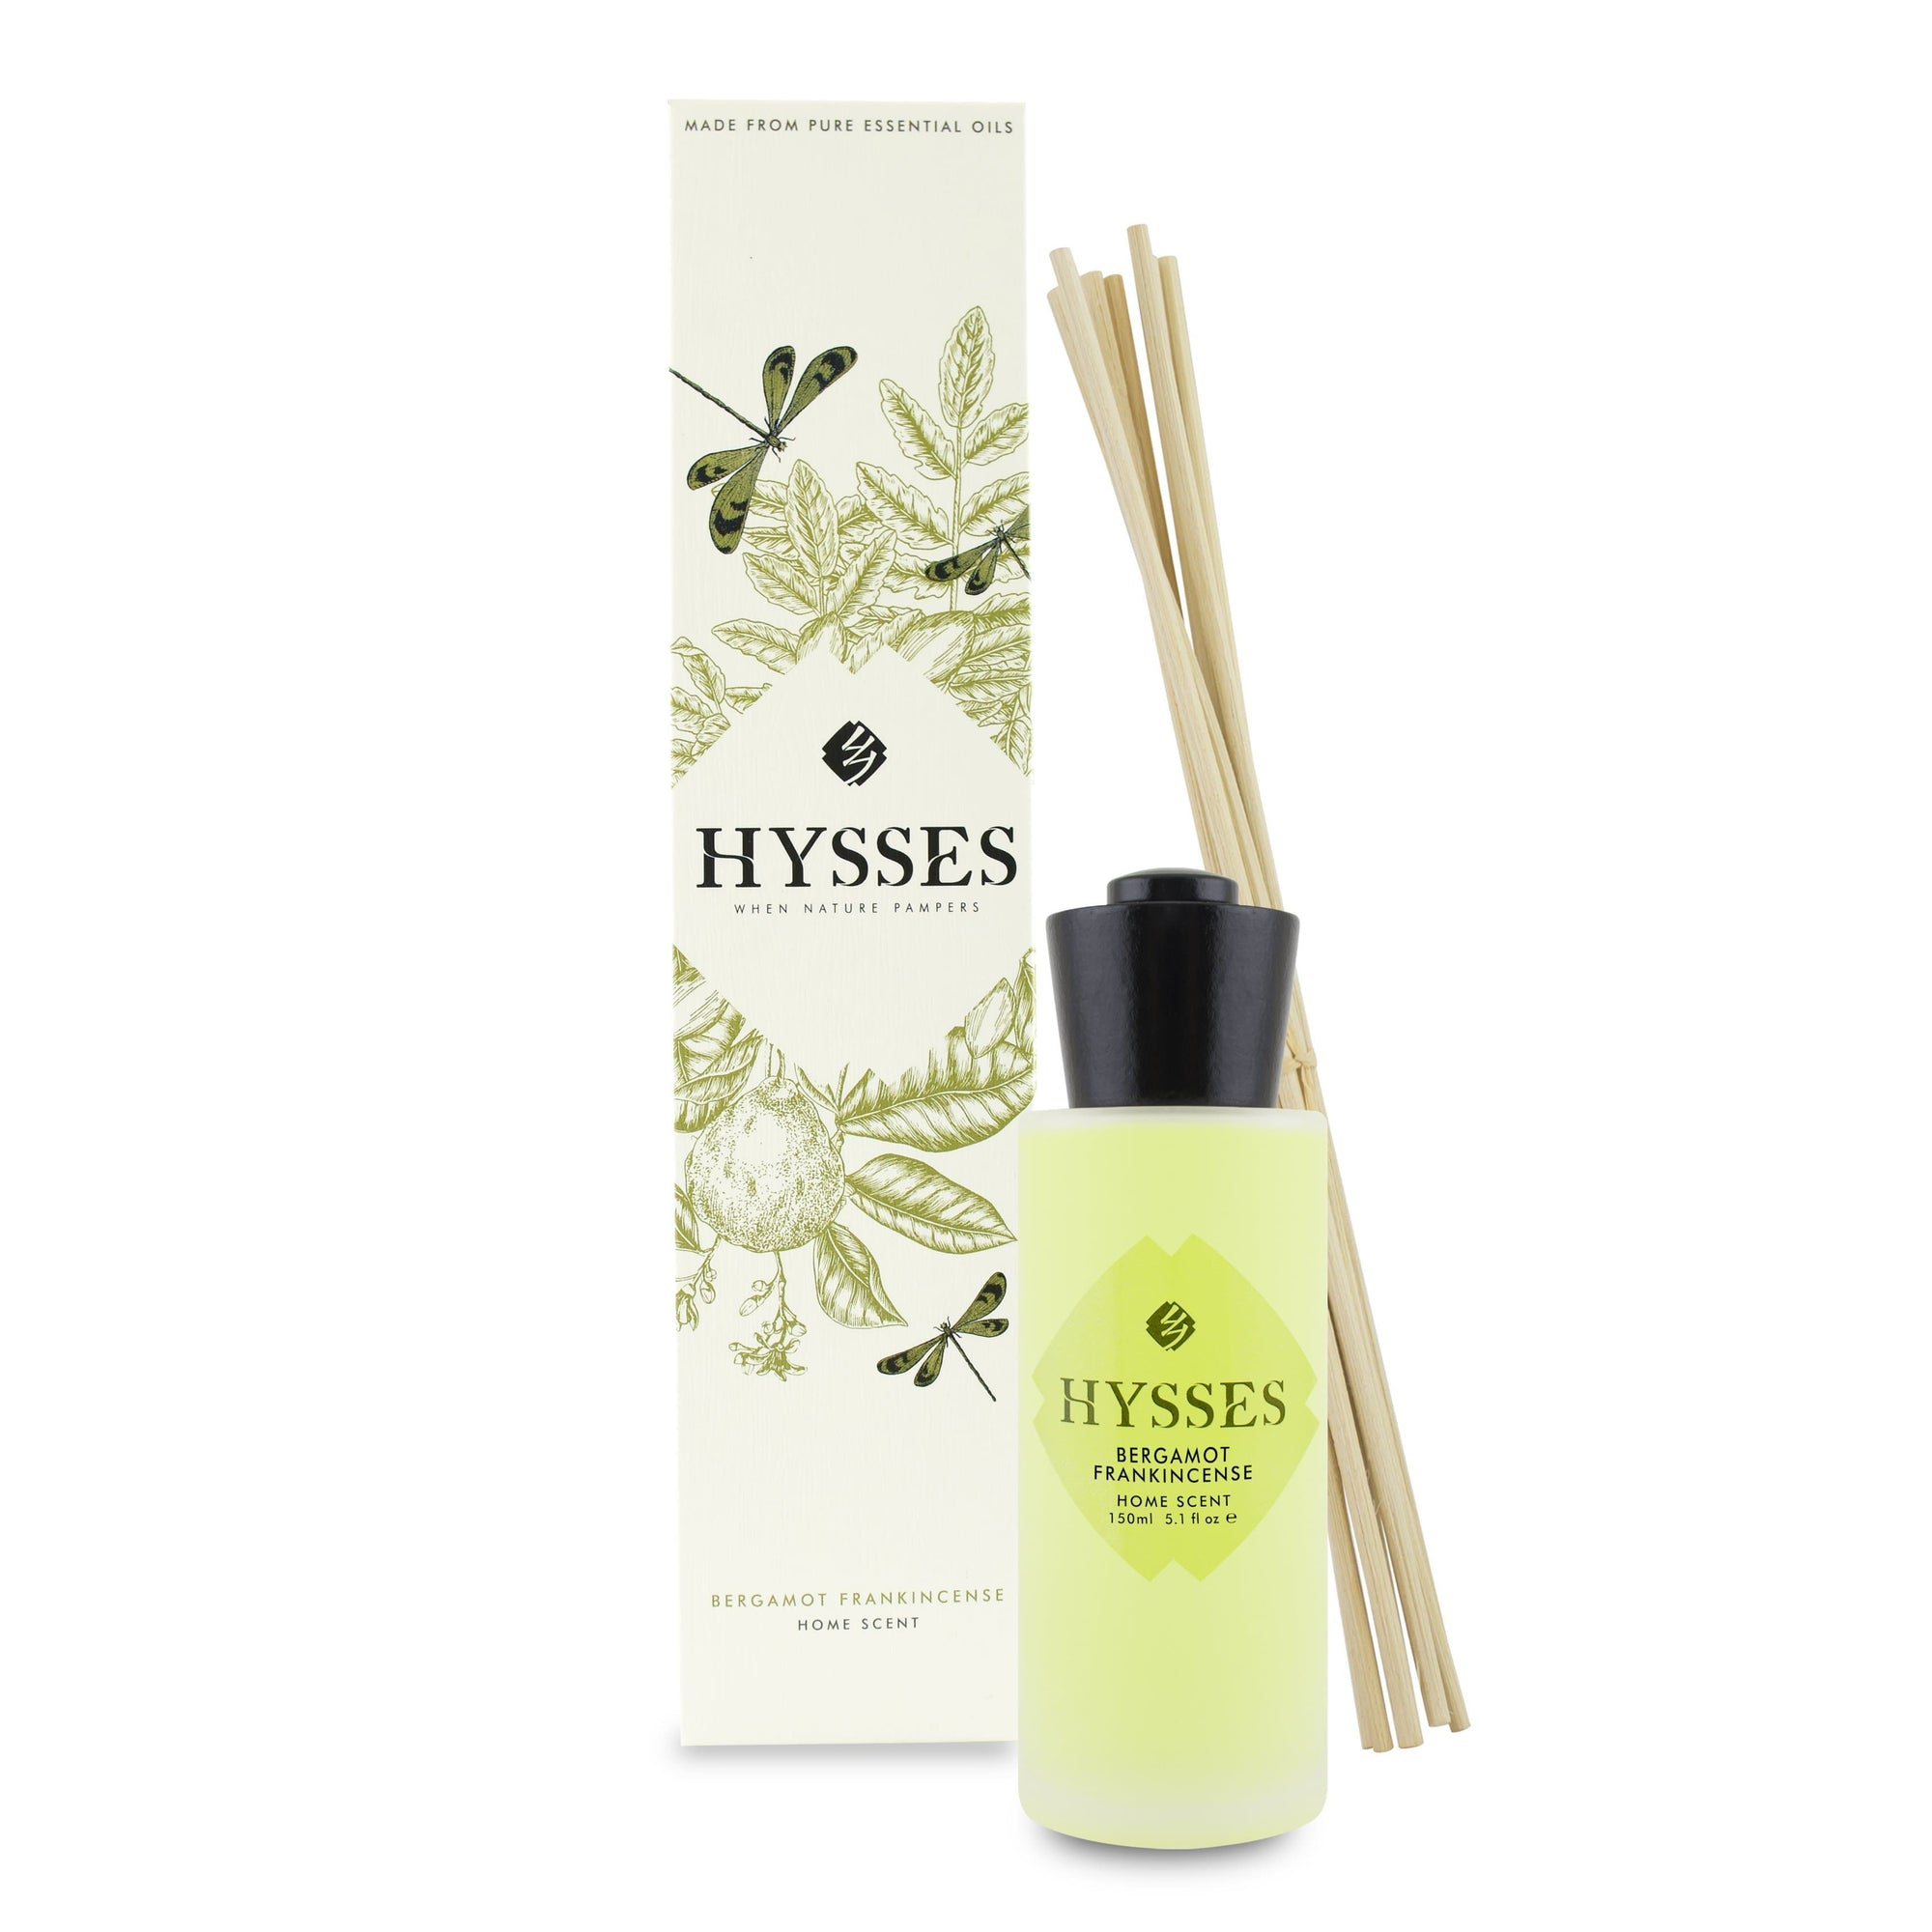 Hysses Home Scents 60ml Home Scent Reed Diffuser Bergamot Frankincense